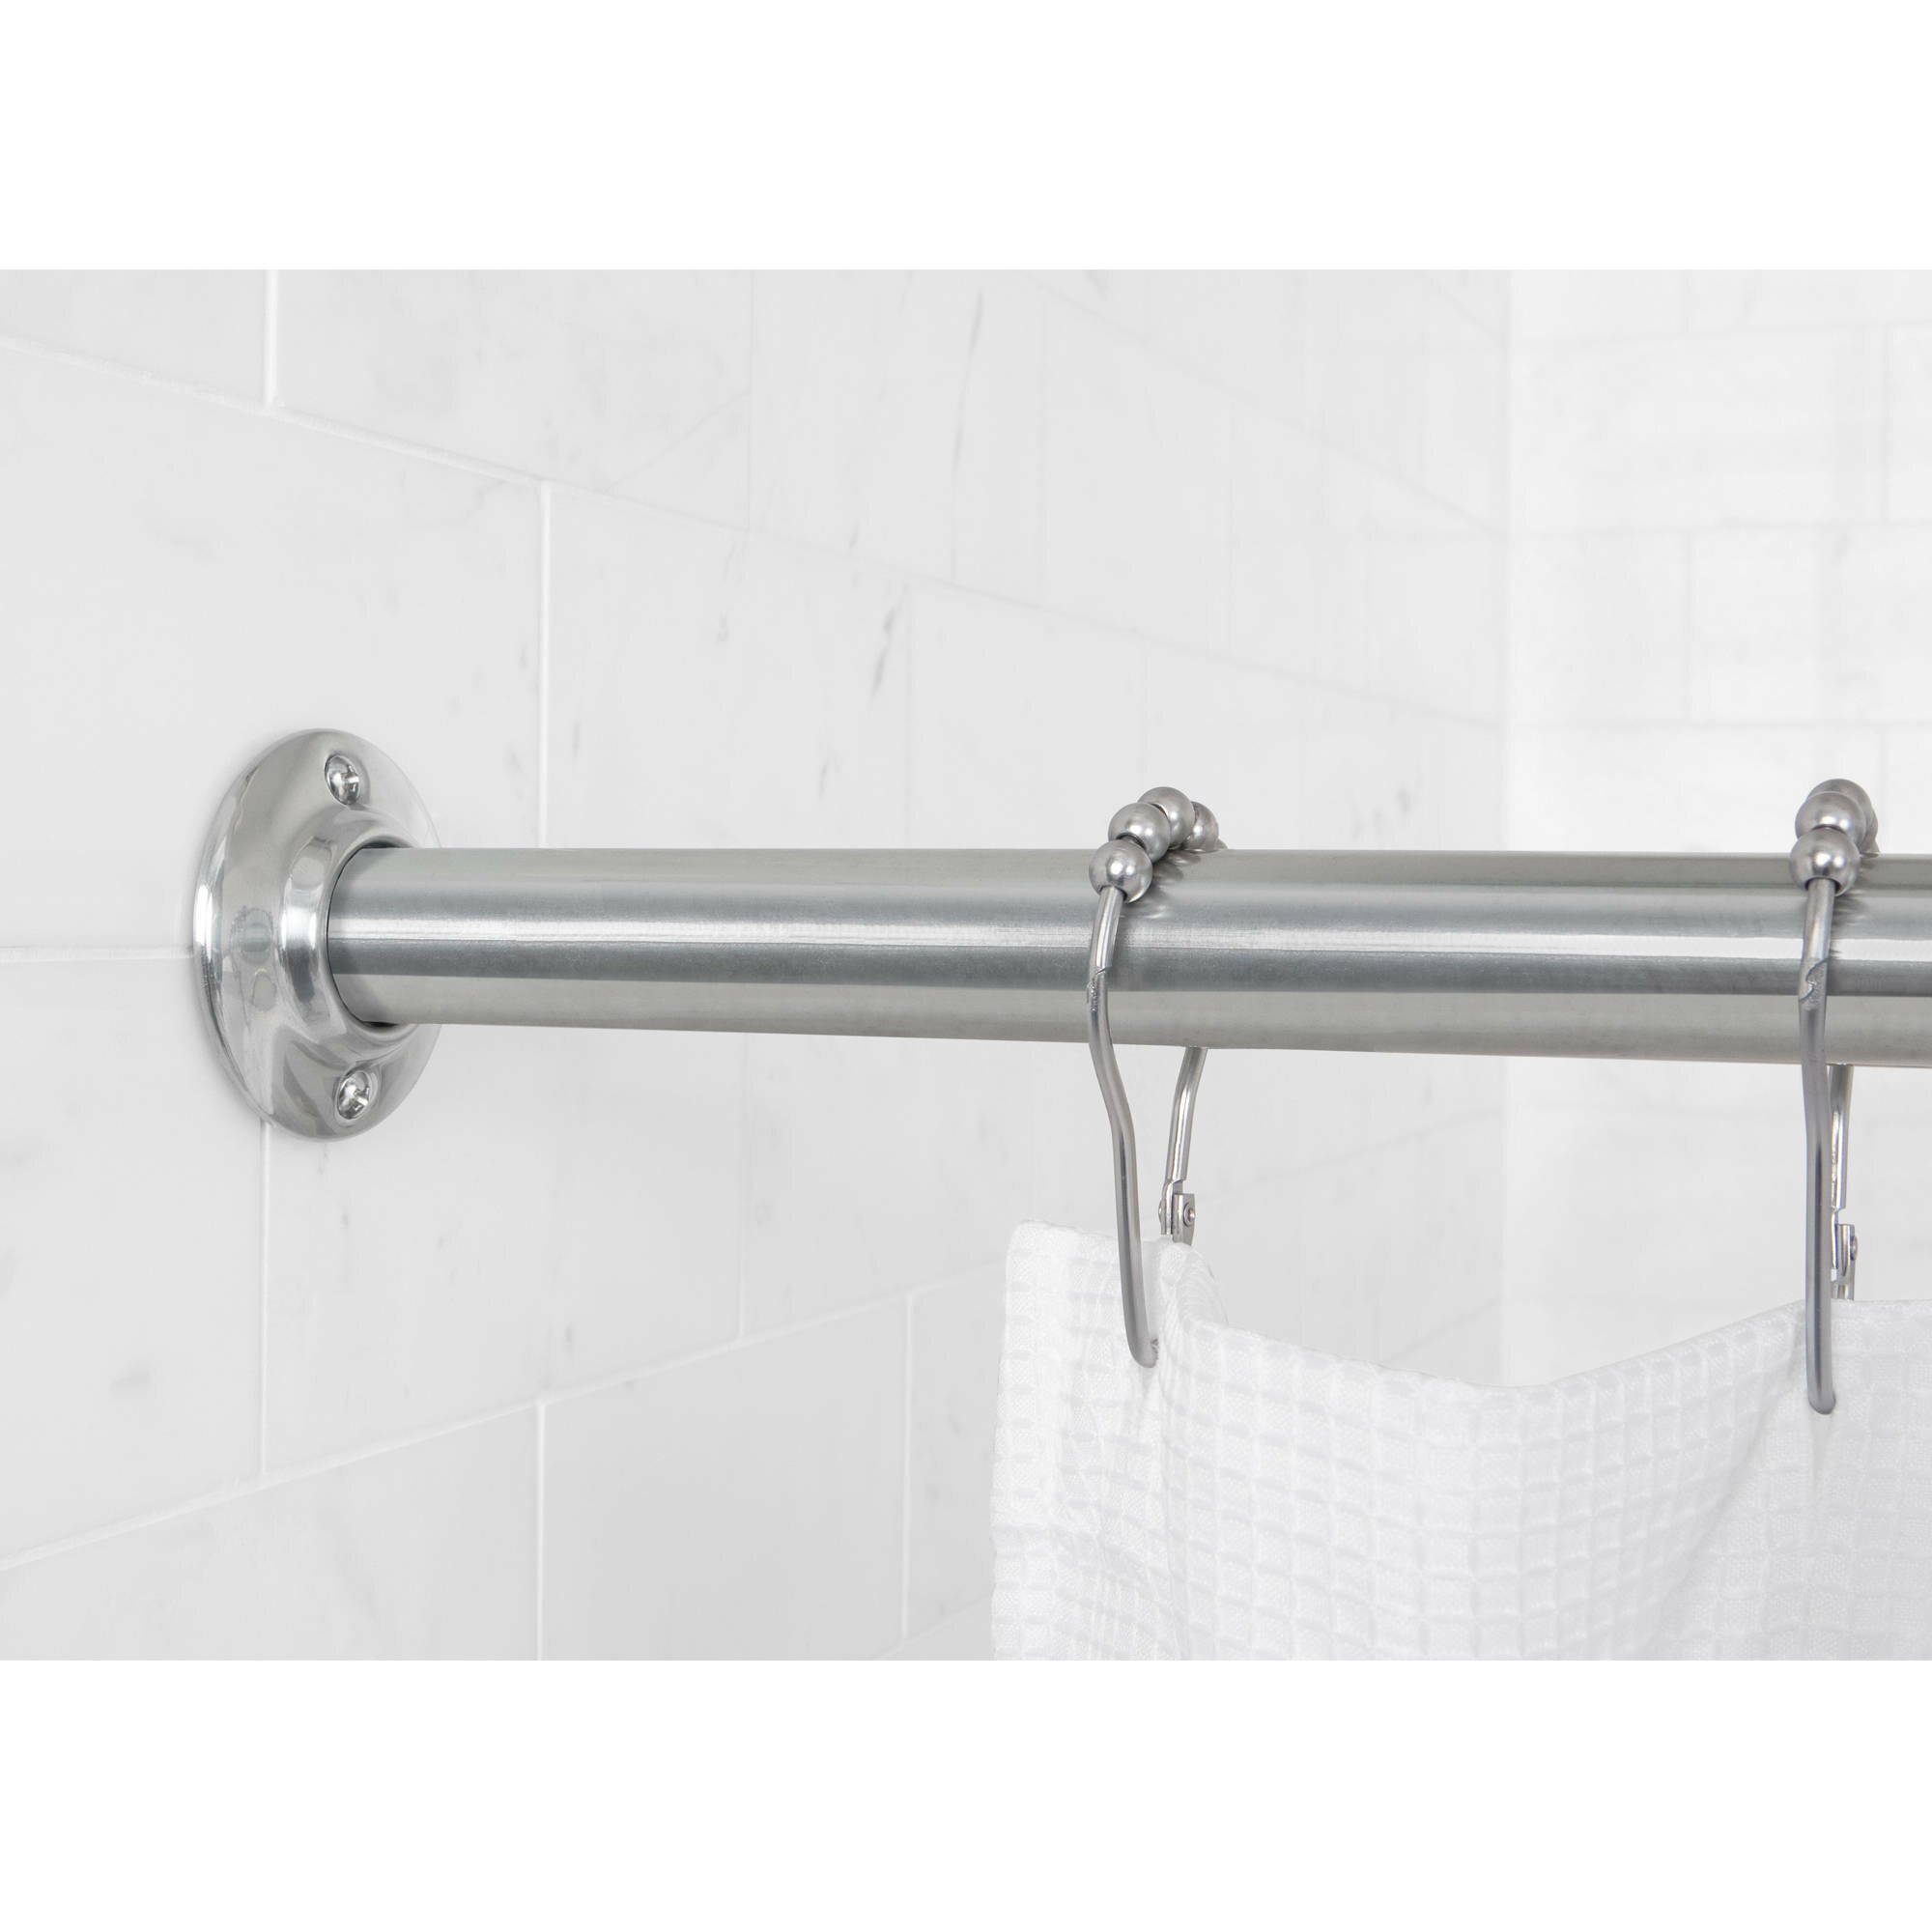 Shower Curtain Tension Rod Extra Long | Shower Curtain Tension Rod | Tension Mounted Curved Shower Curtain Rod